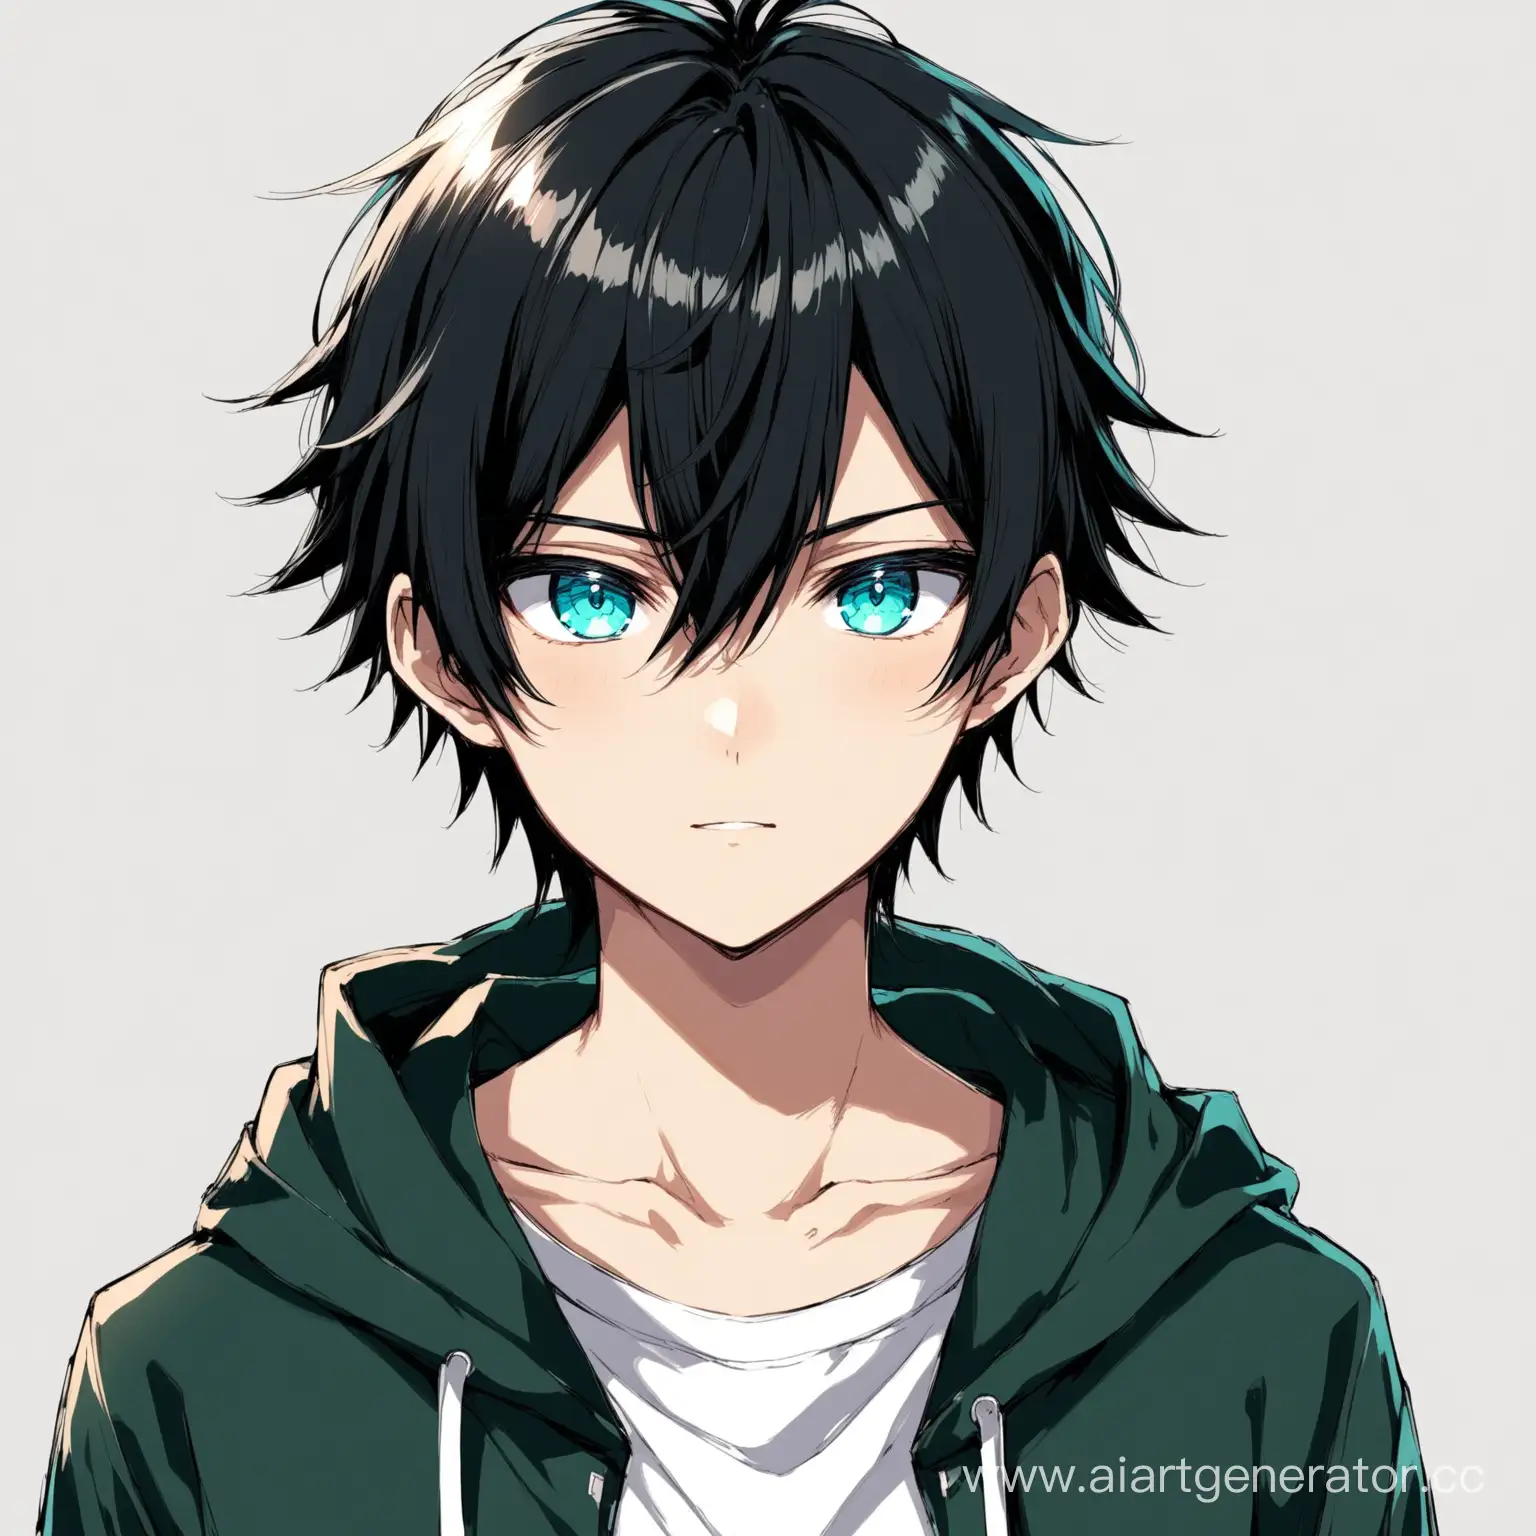 Anime-Boy-with-Black-Hair-and-Turquoise-Eyes-in-a-Futuristic-Cityscape